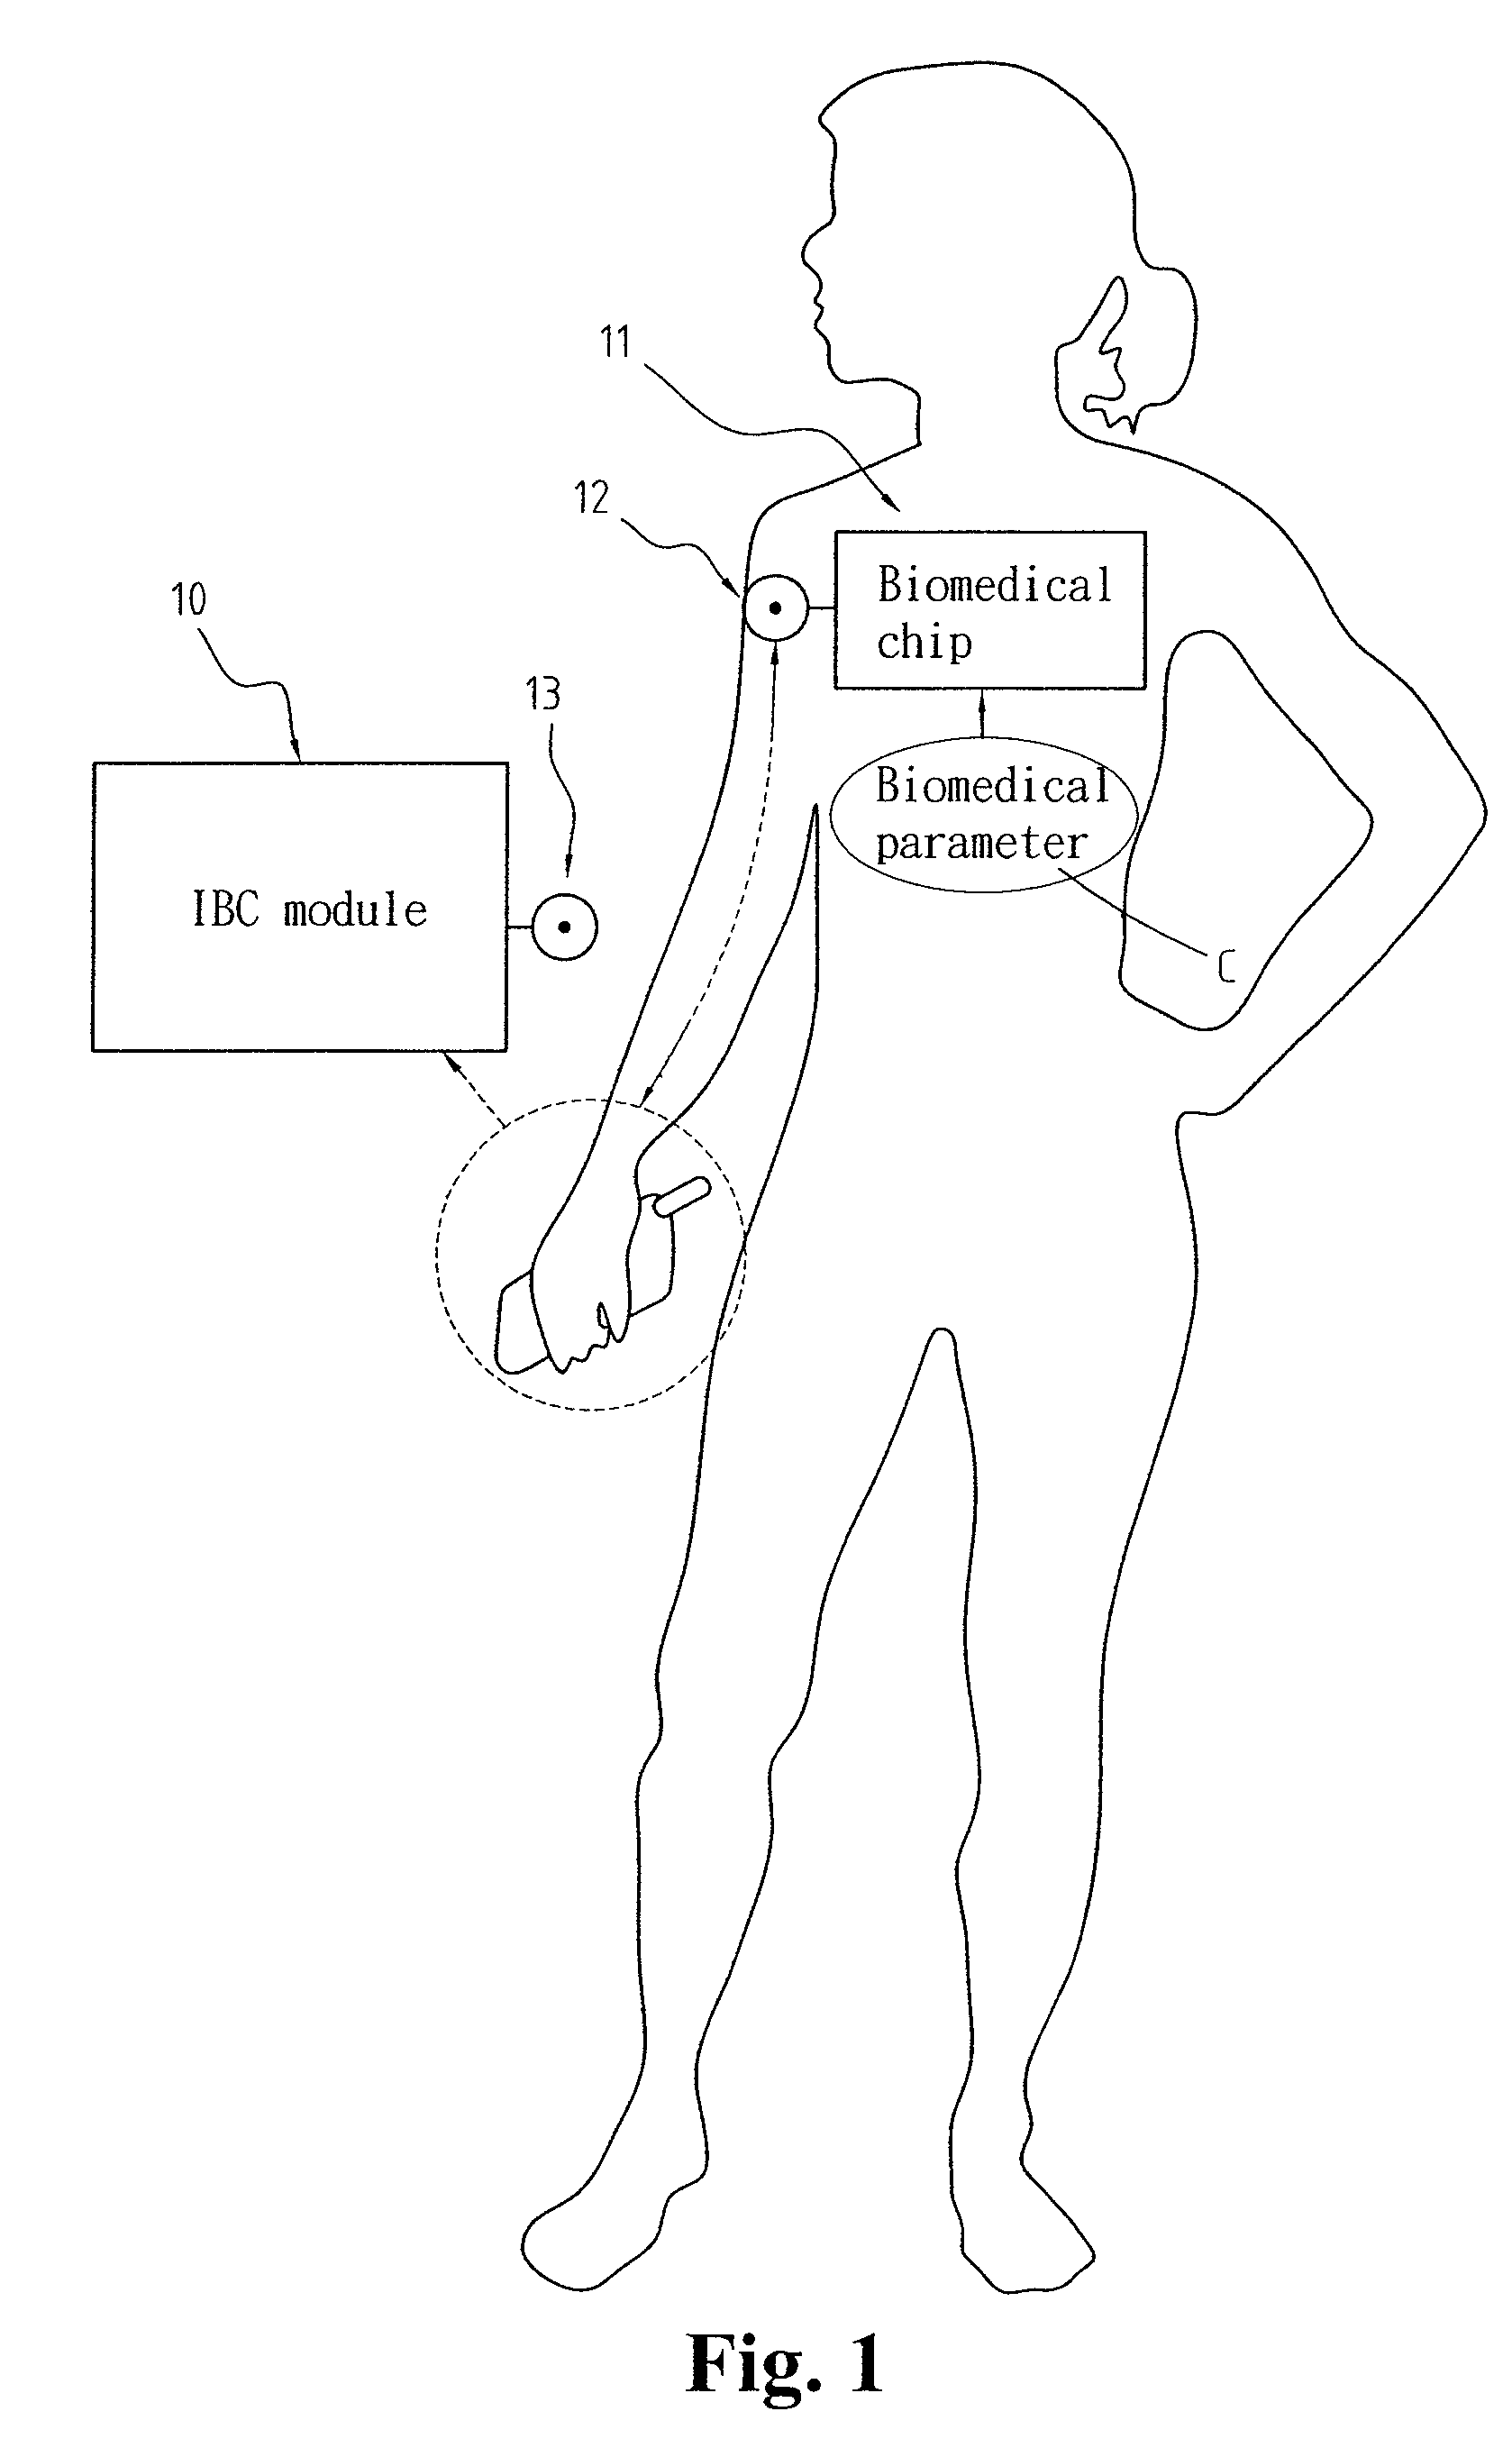 Intra-body communication (IBC) device and a method of implementing the IBC device